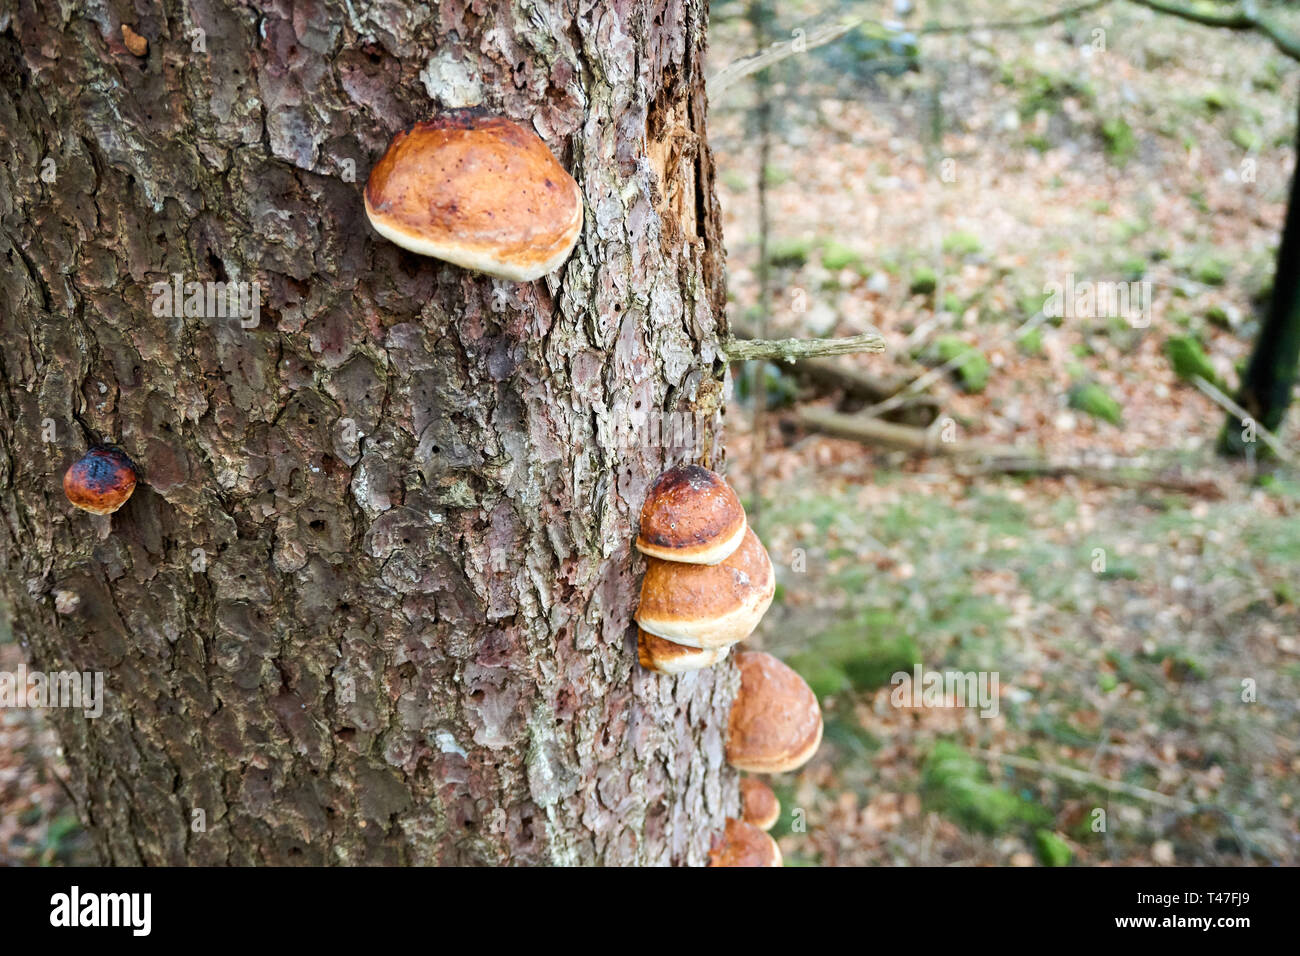 Fungus growing from the stump of a tree Stock Photo